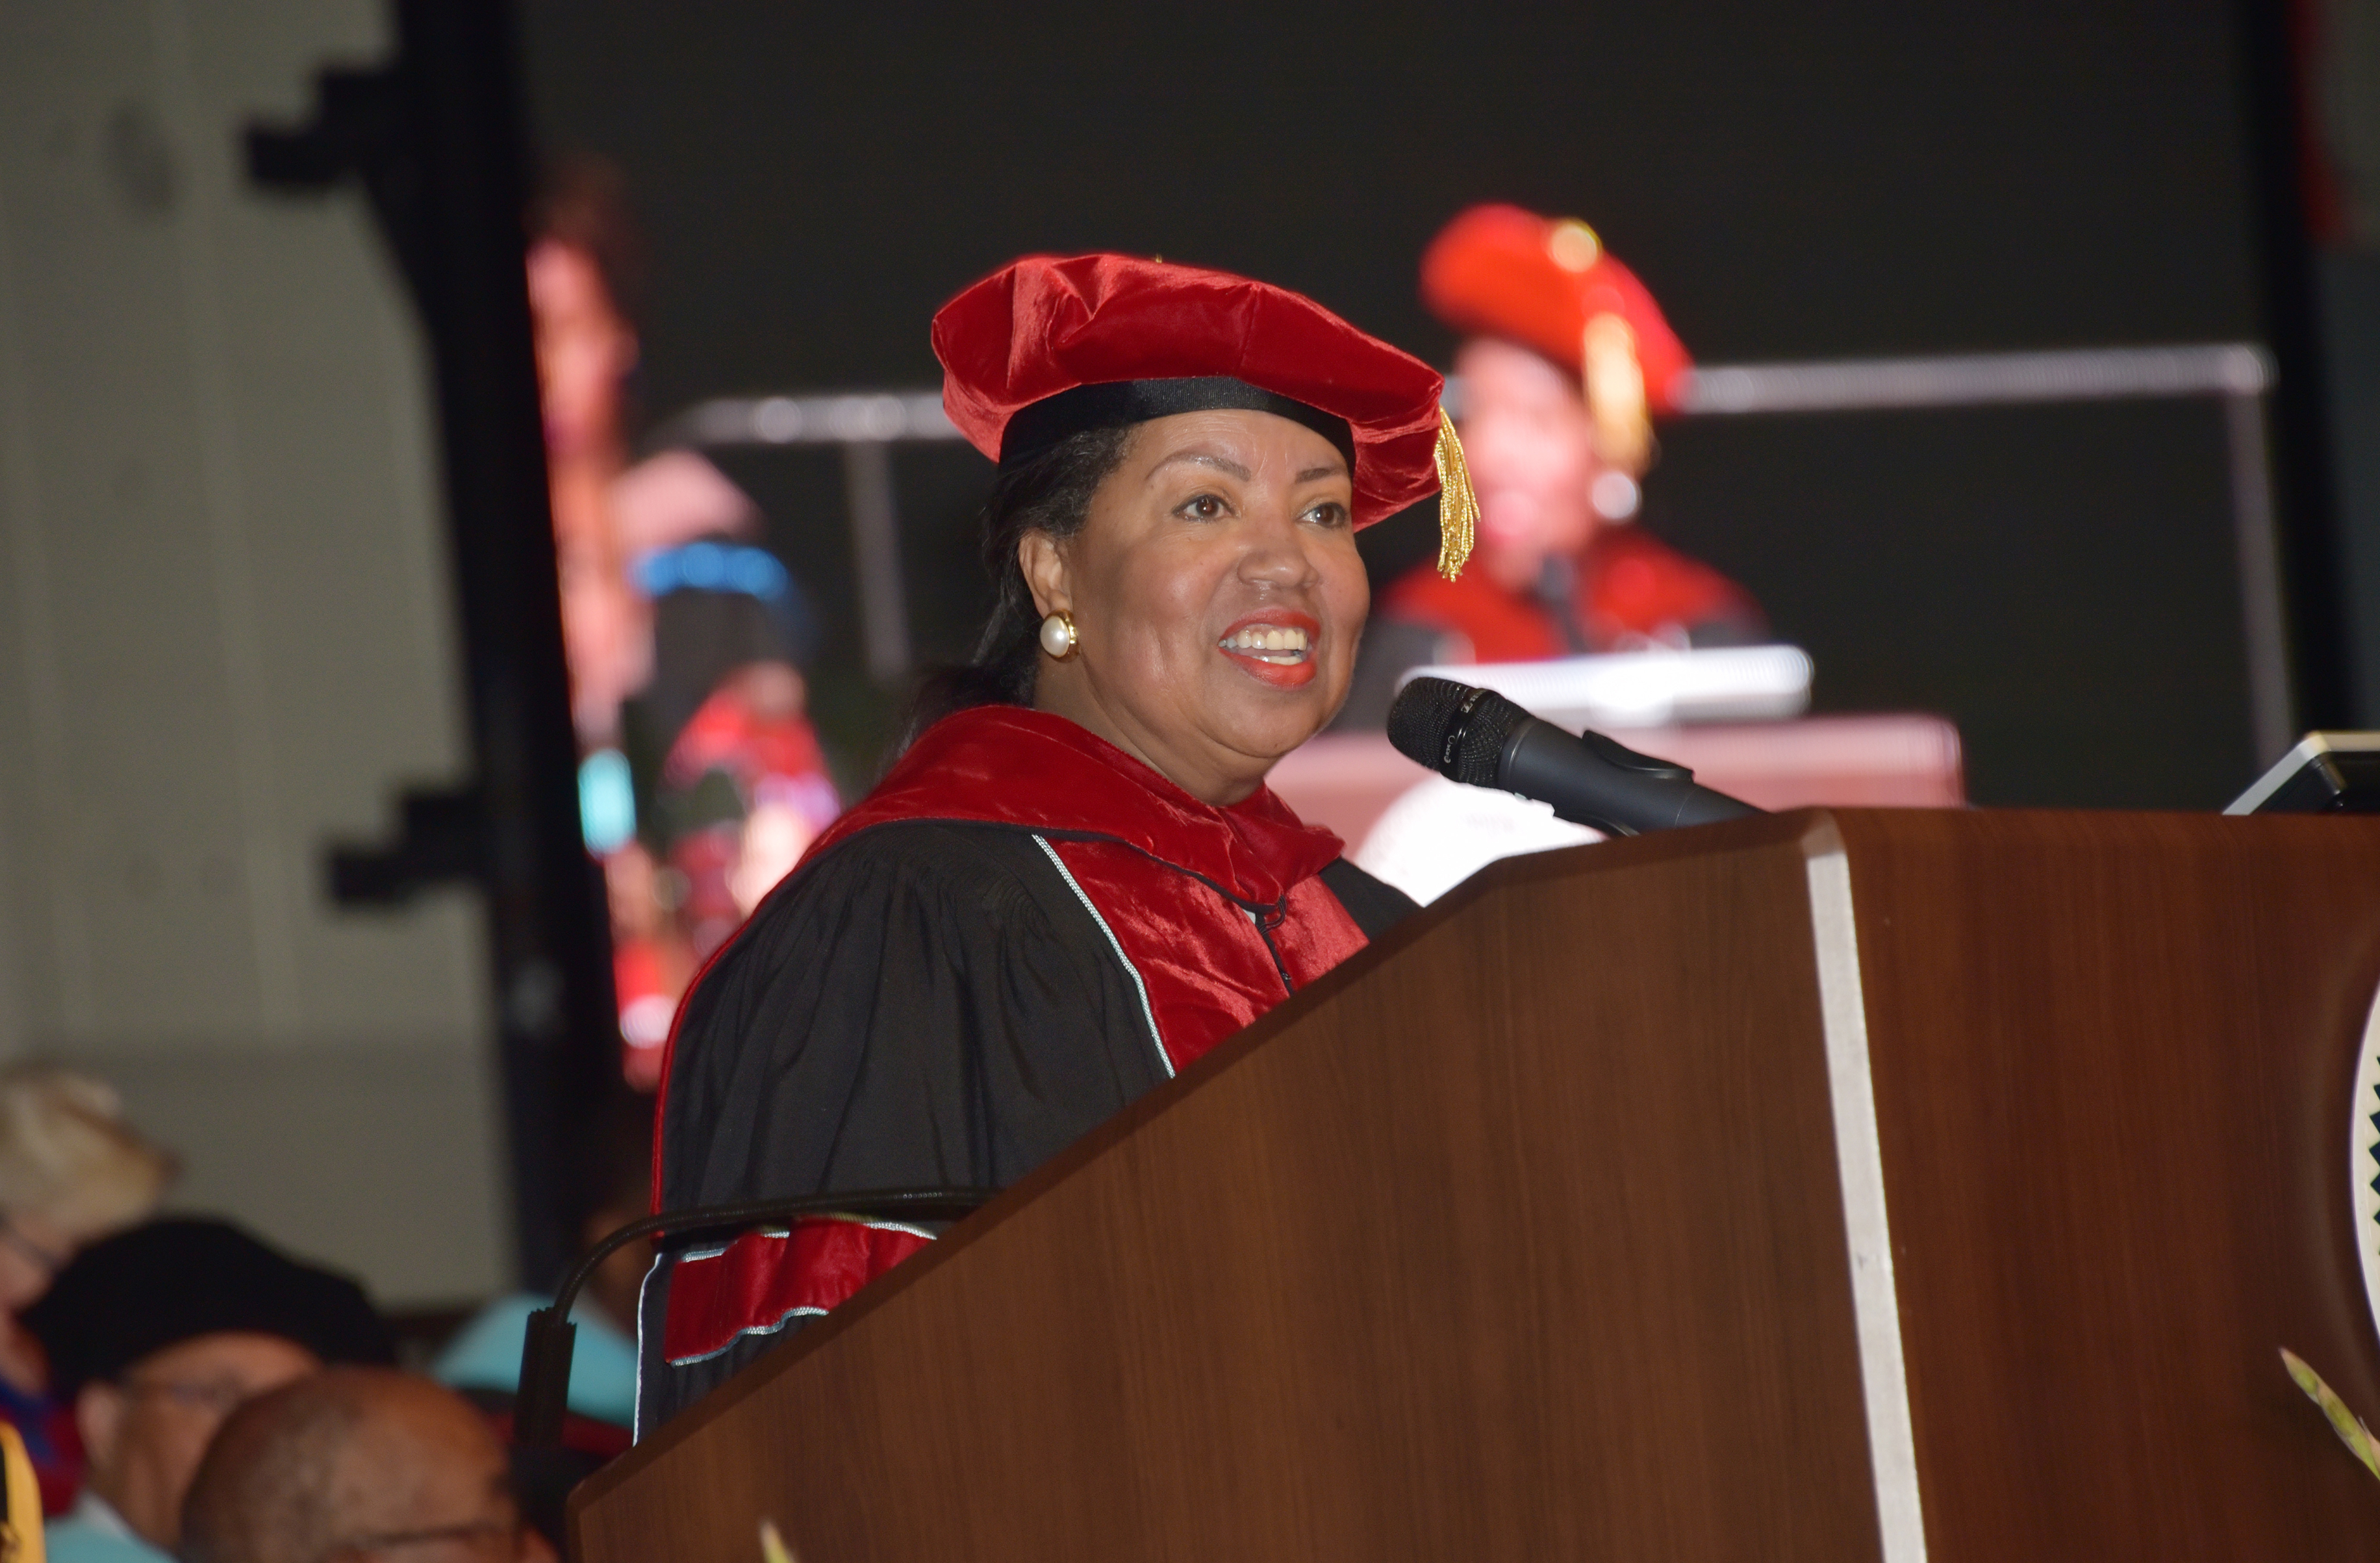 Board Chairperson Devona Williams discusses how the University prepares its students for the future global job market they will face after graduation.